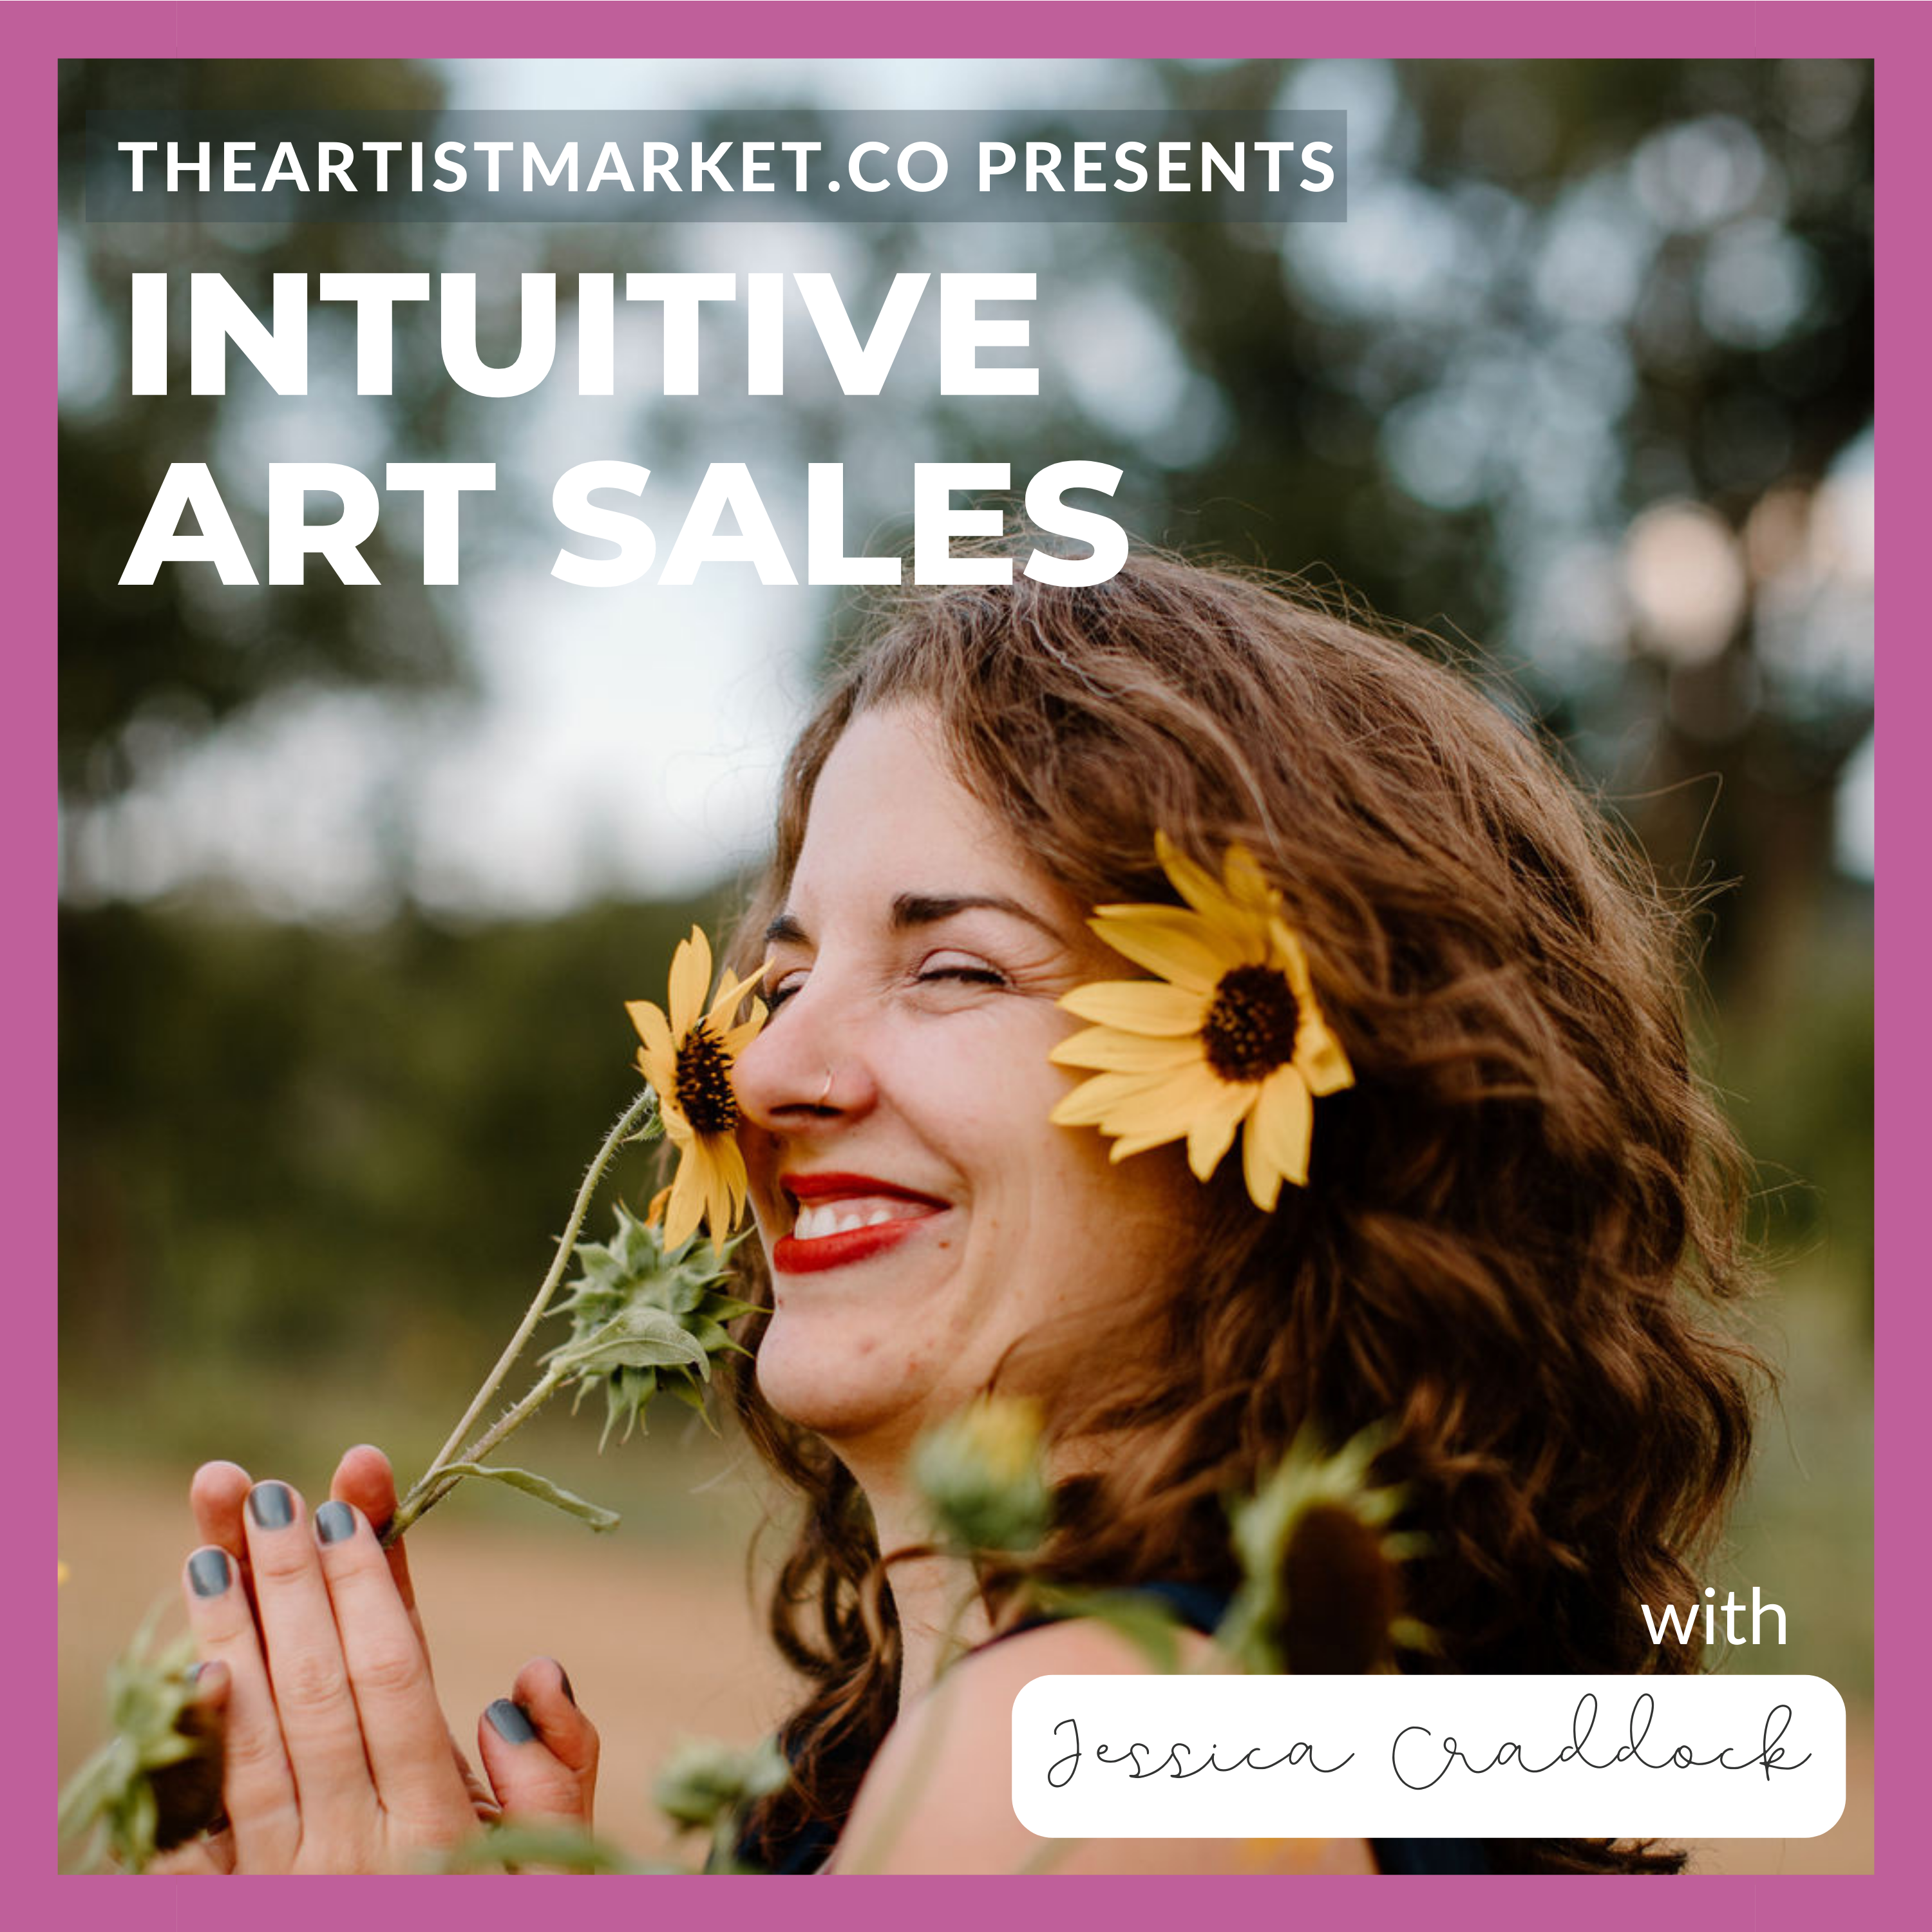 "How can I use Instagram and Pinterest to promote my art business?" - Olivia Franklin E65